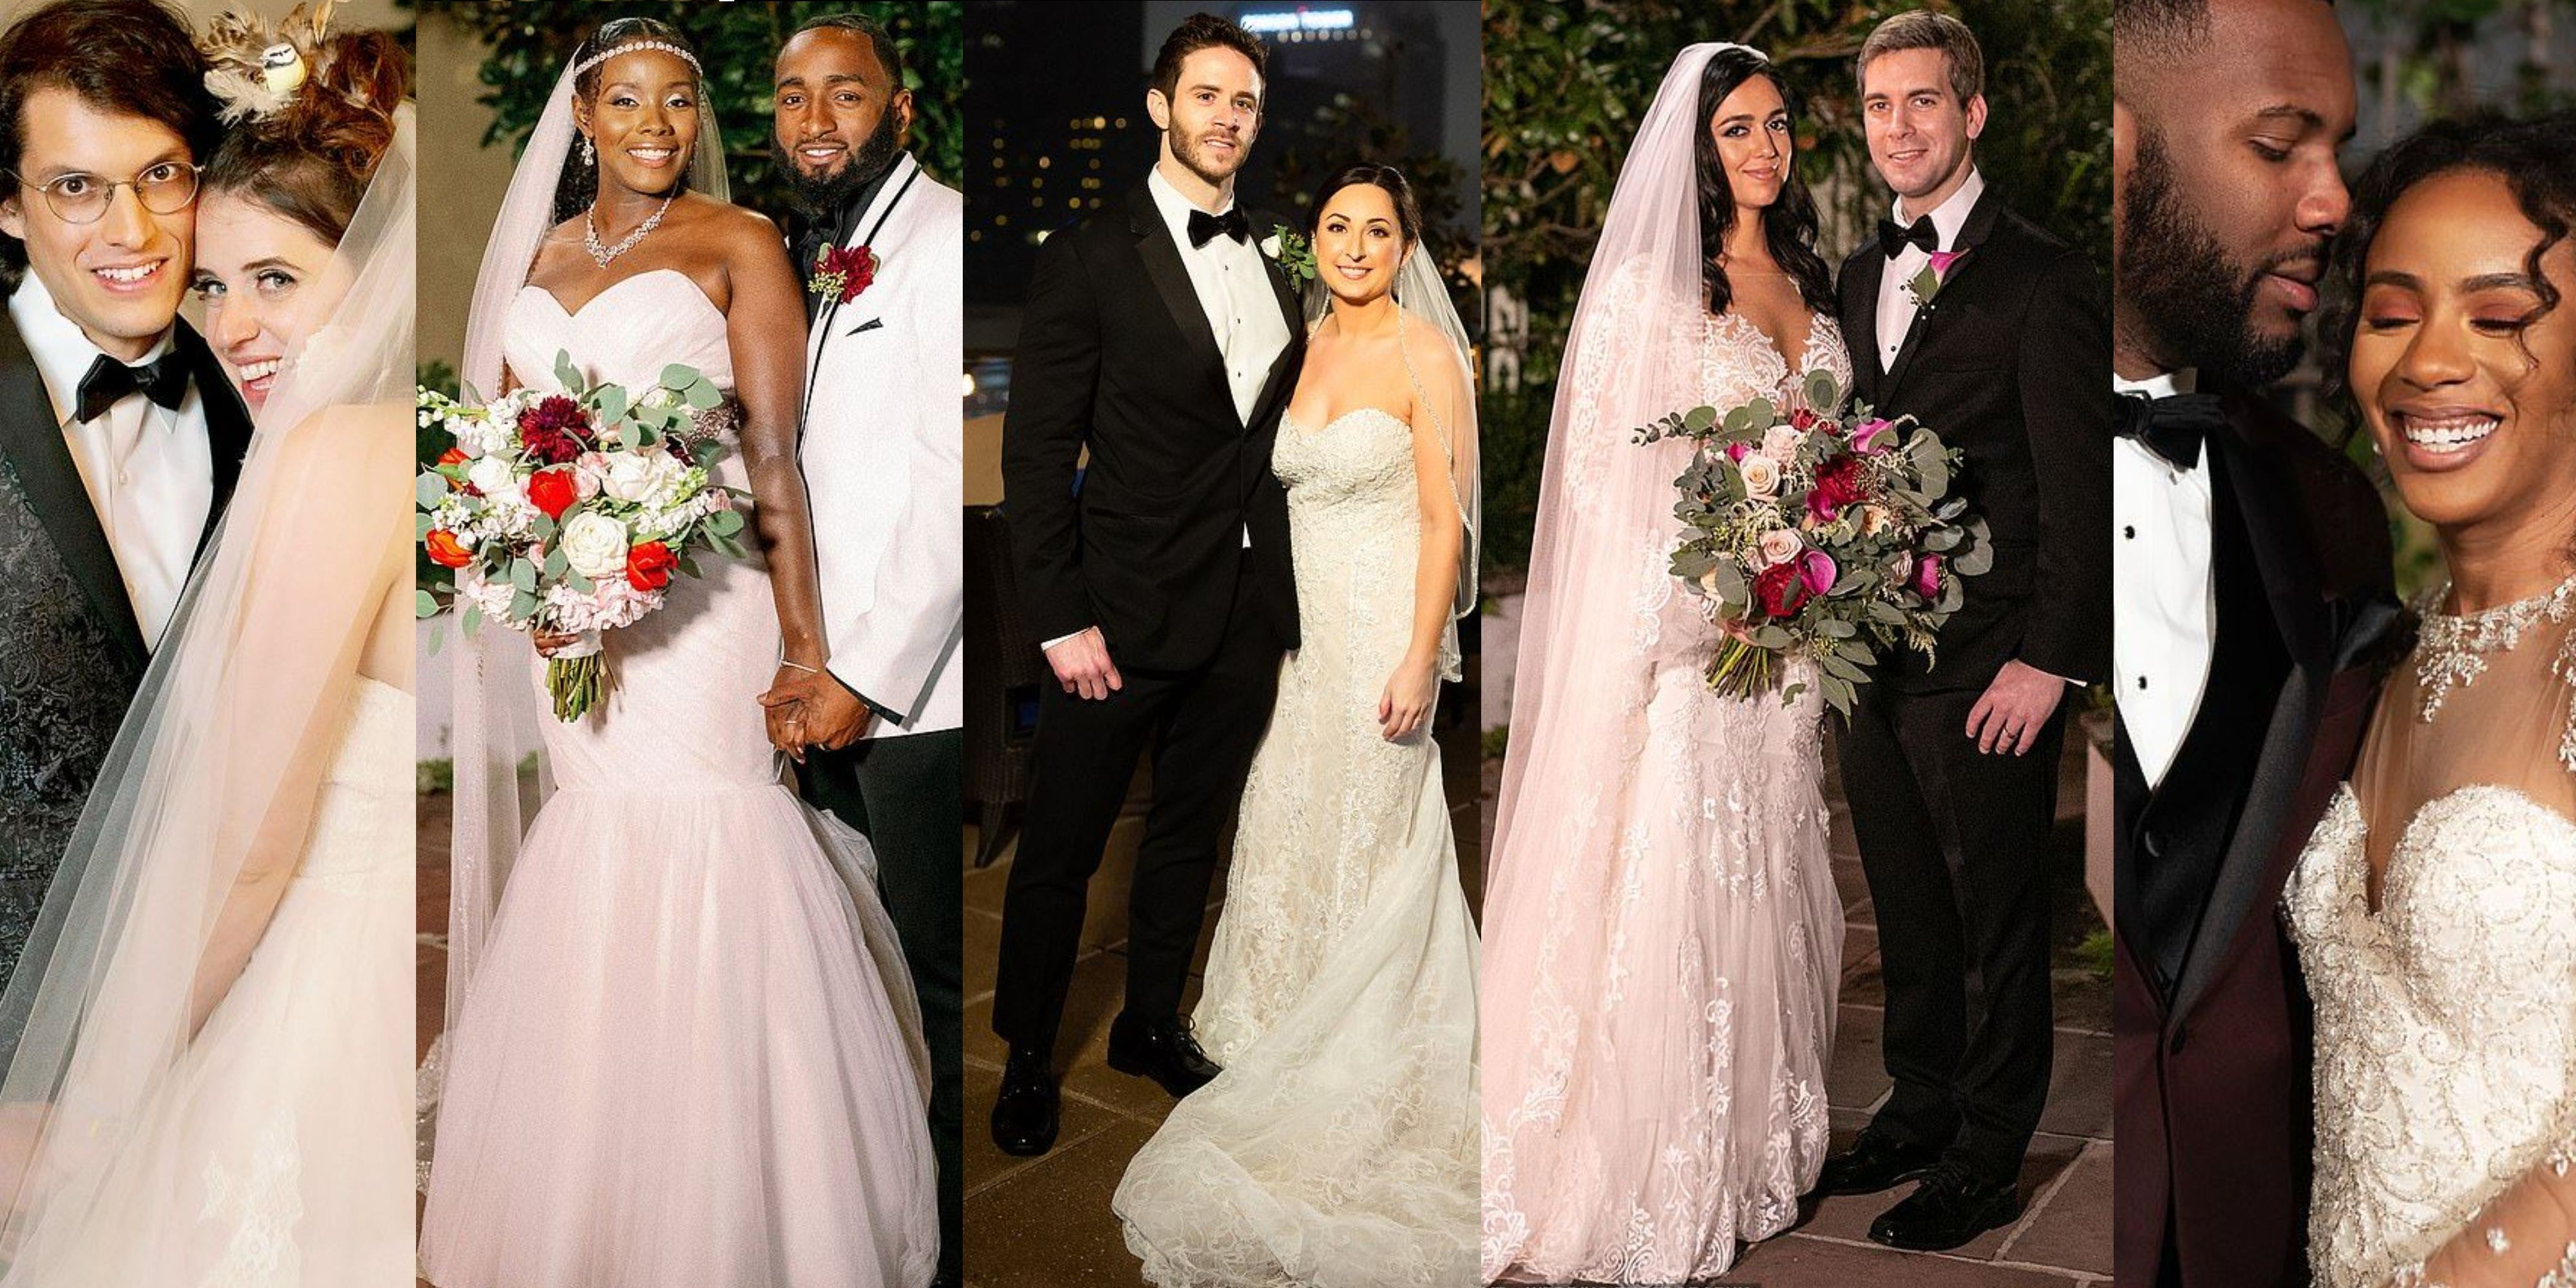 Married at First Sight Season 11: Couples Reveal